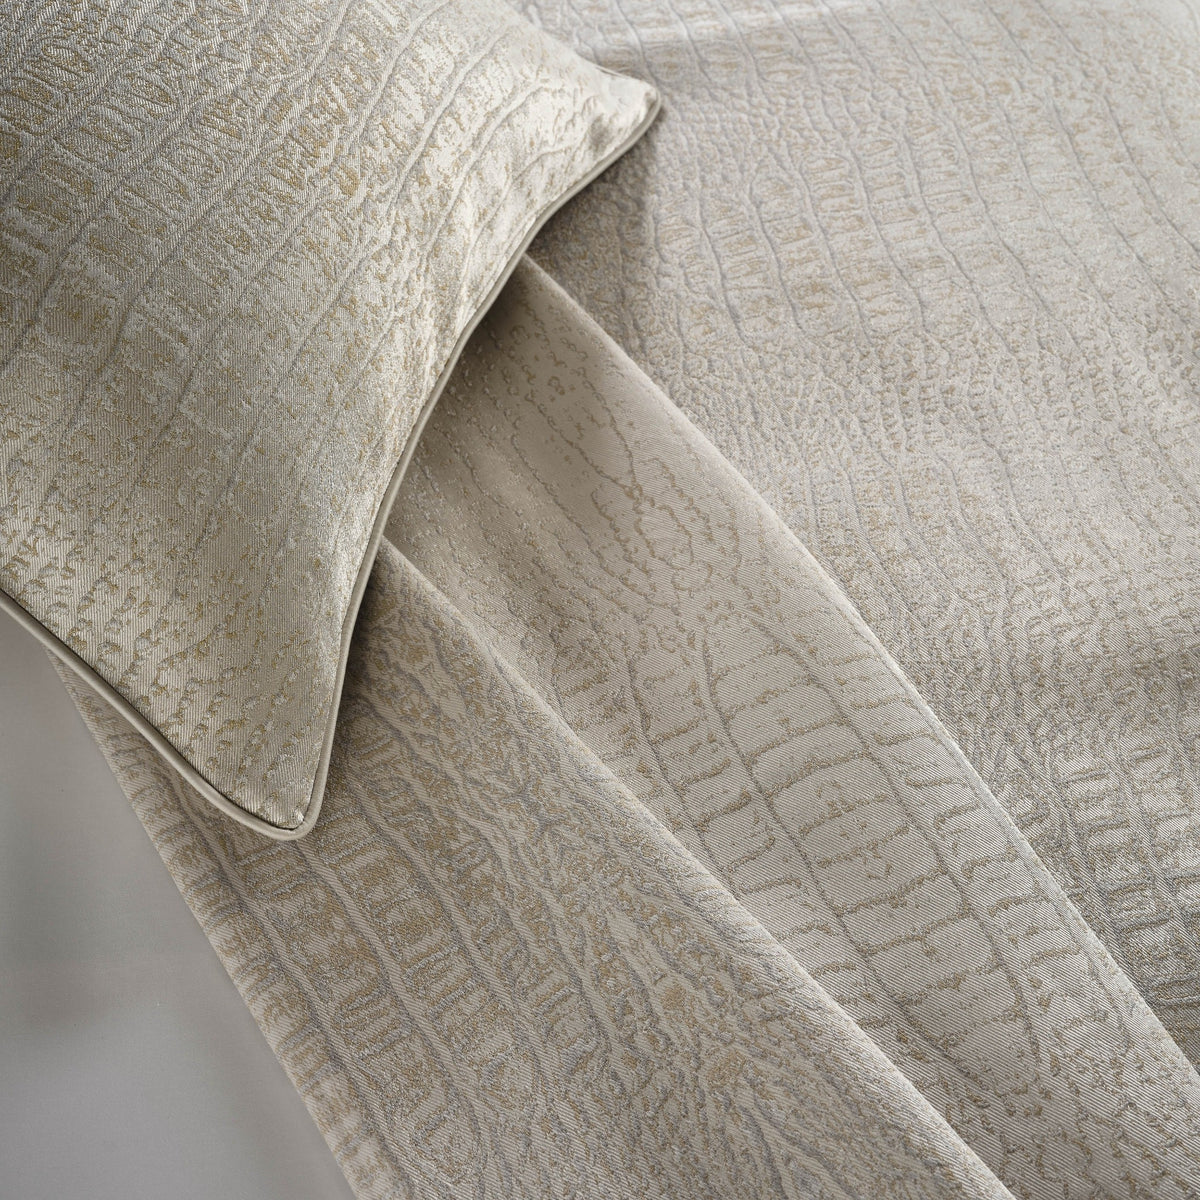 Detail of Celso de Lemos Luxe Coverlet and Sham in Naturel Color